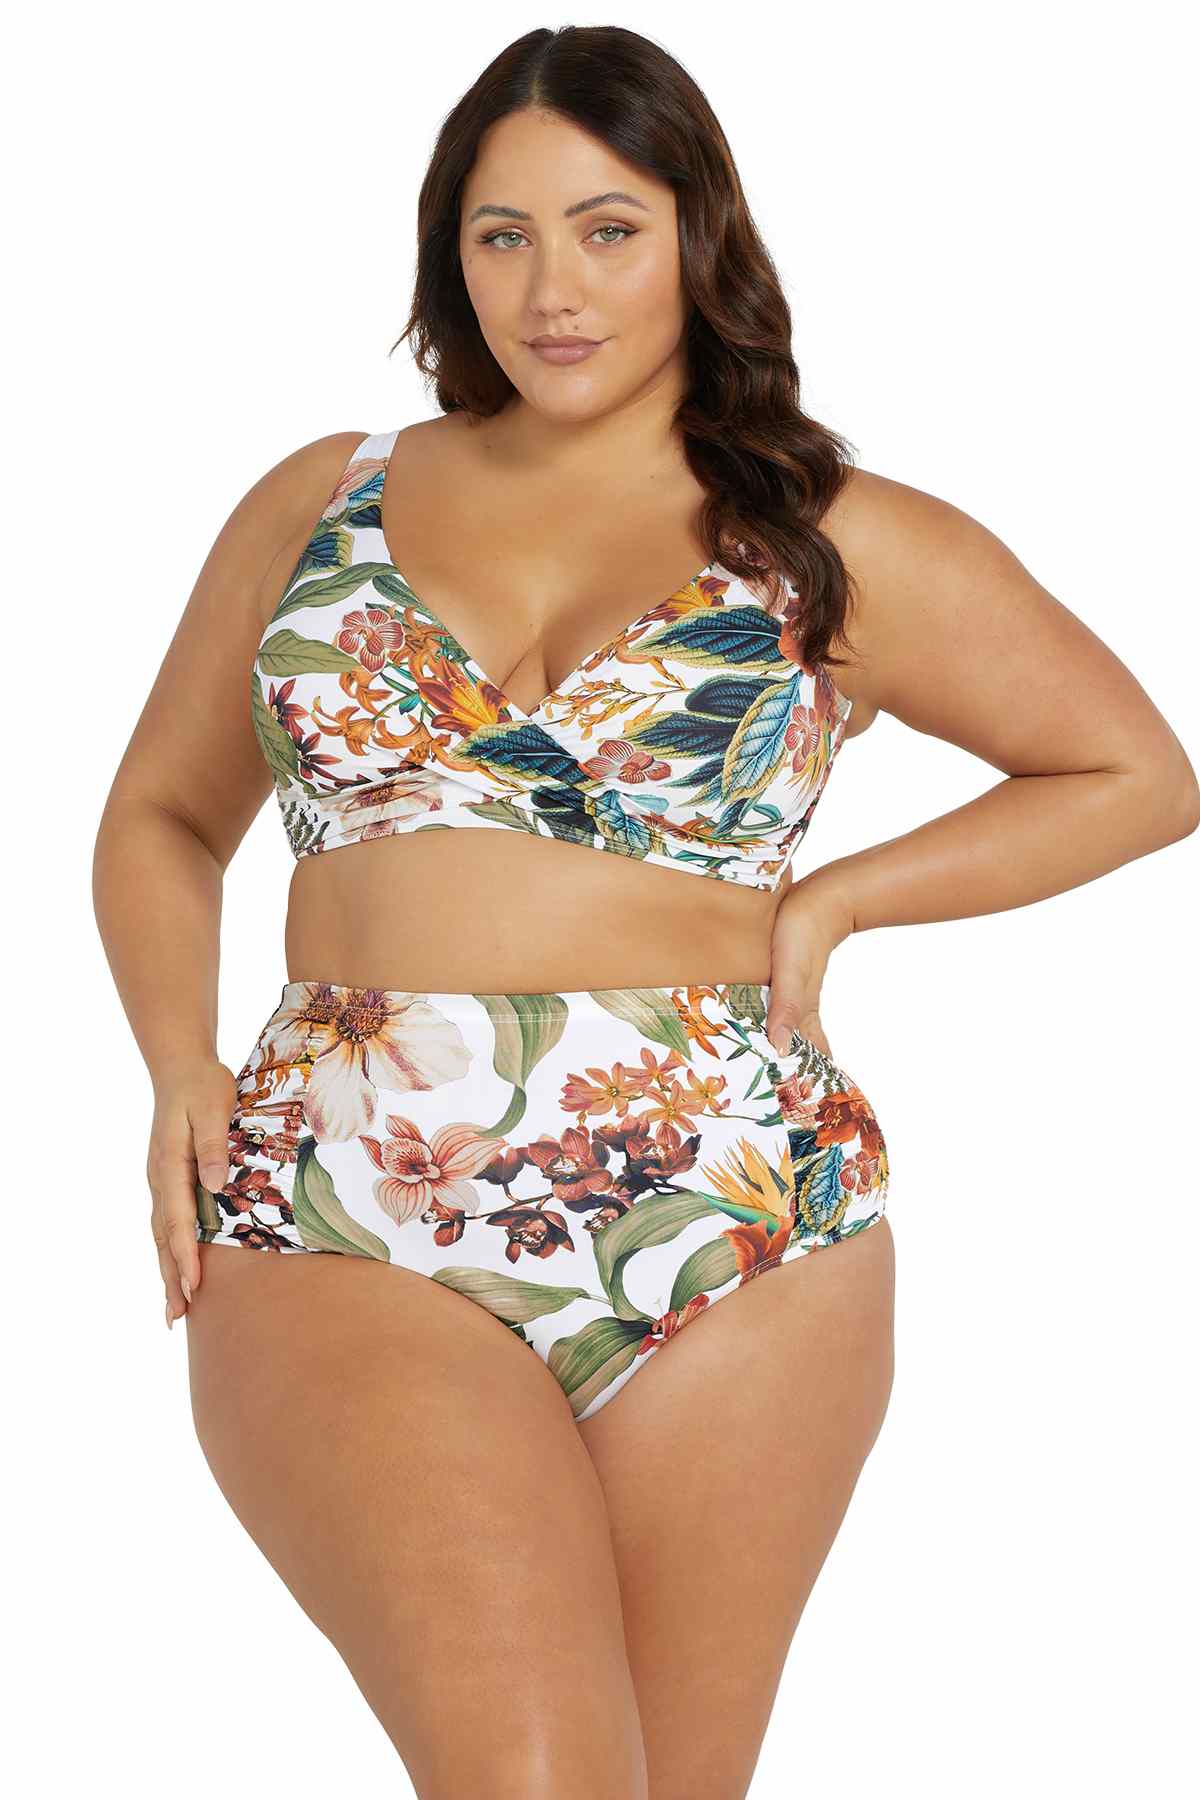 The Curvy Girls Guide on How to Measure Yourself – Artesands Swim Australia